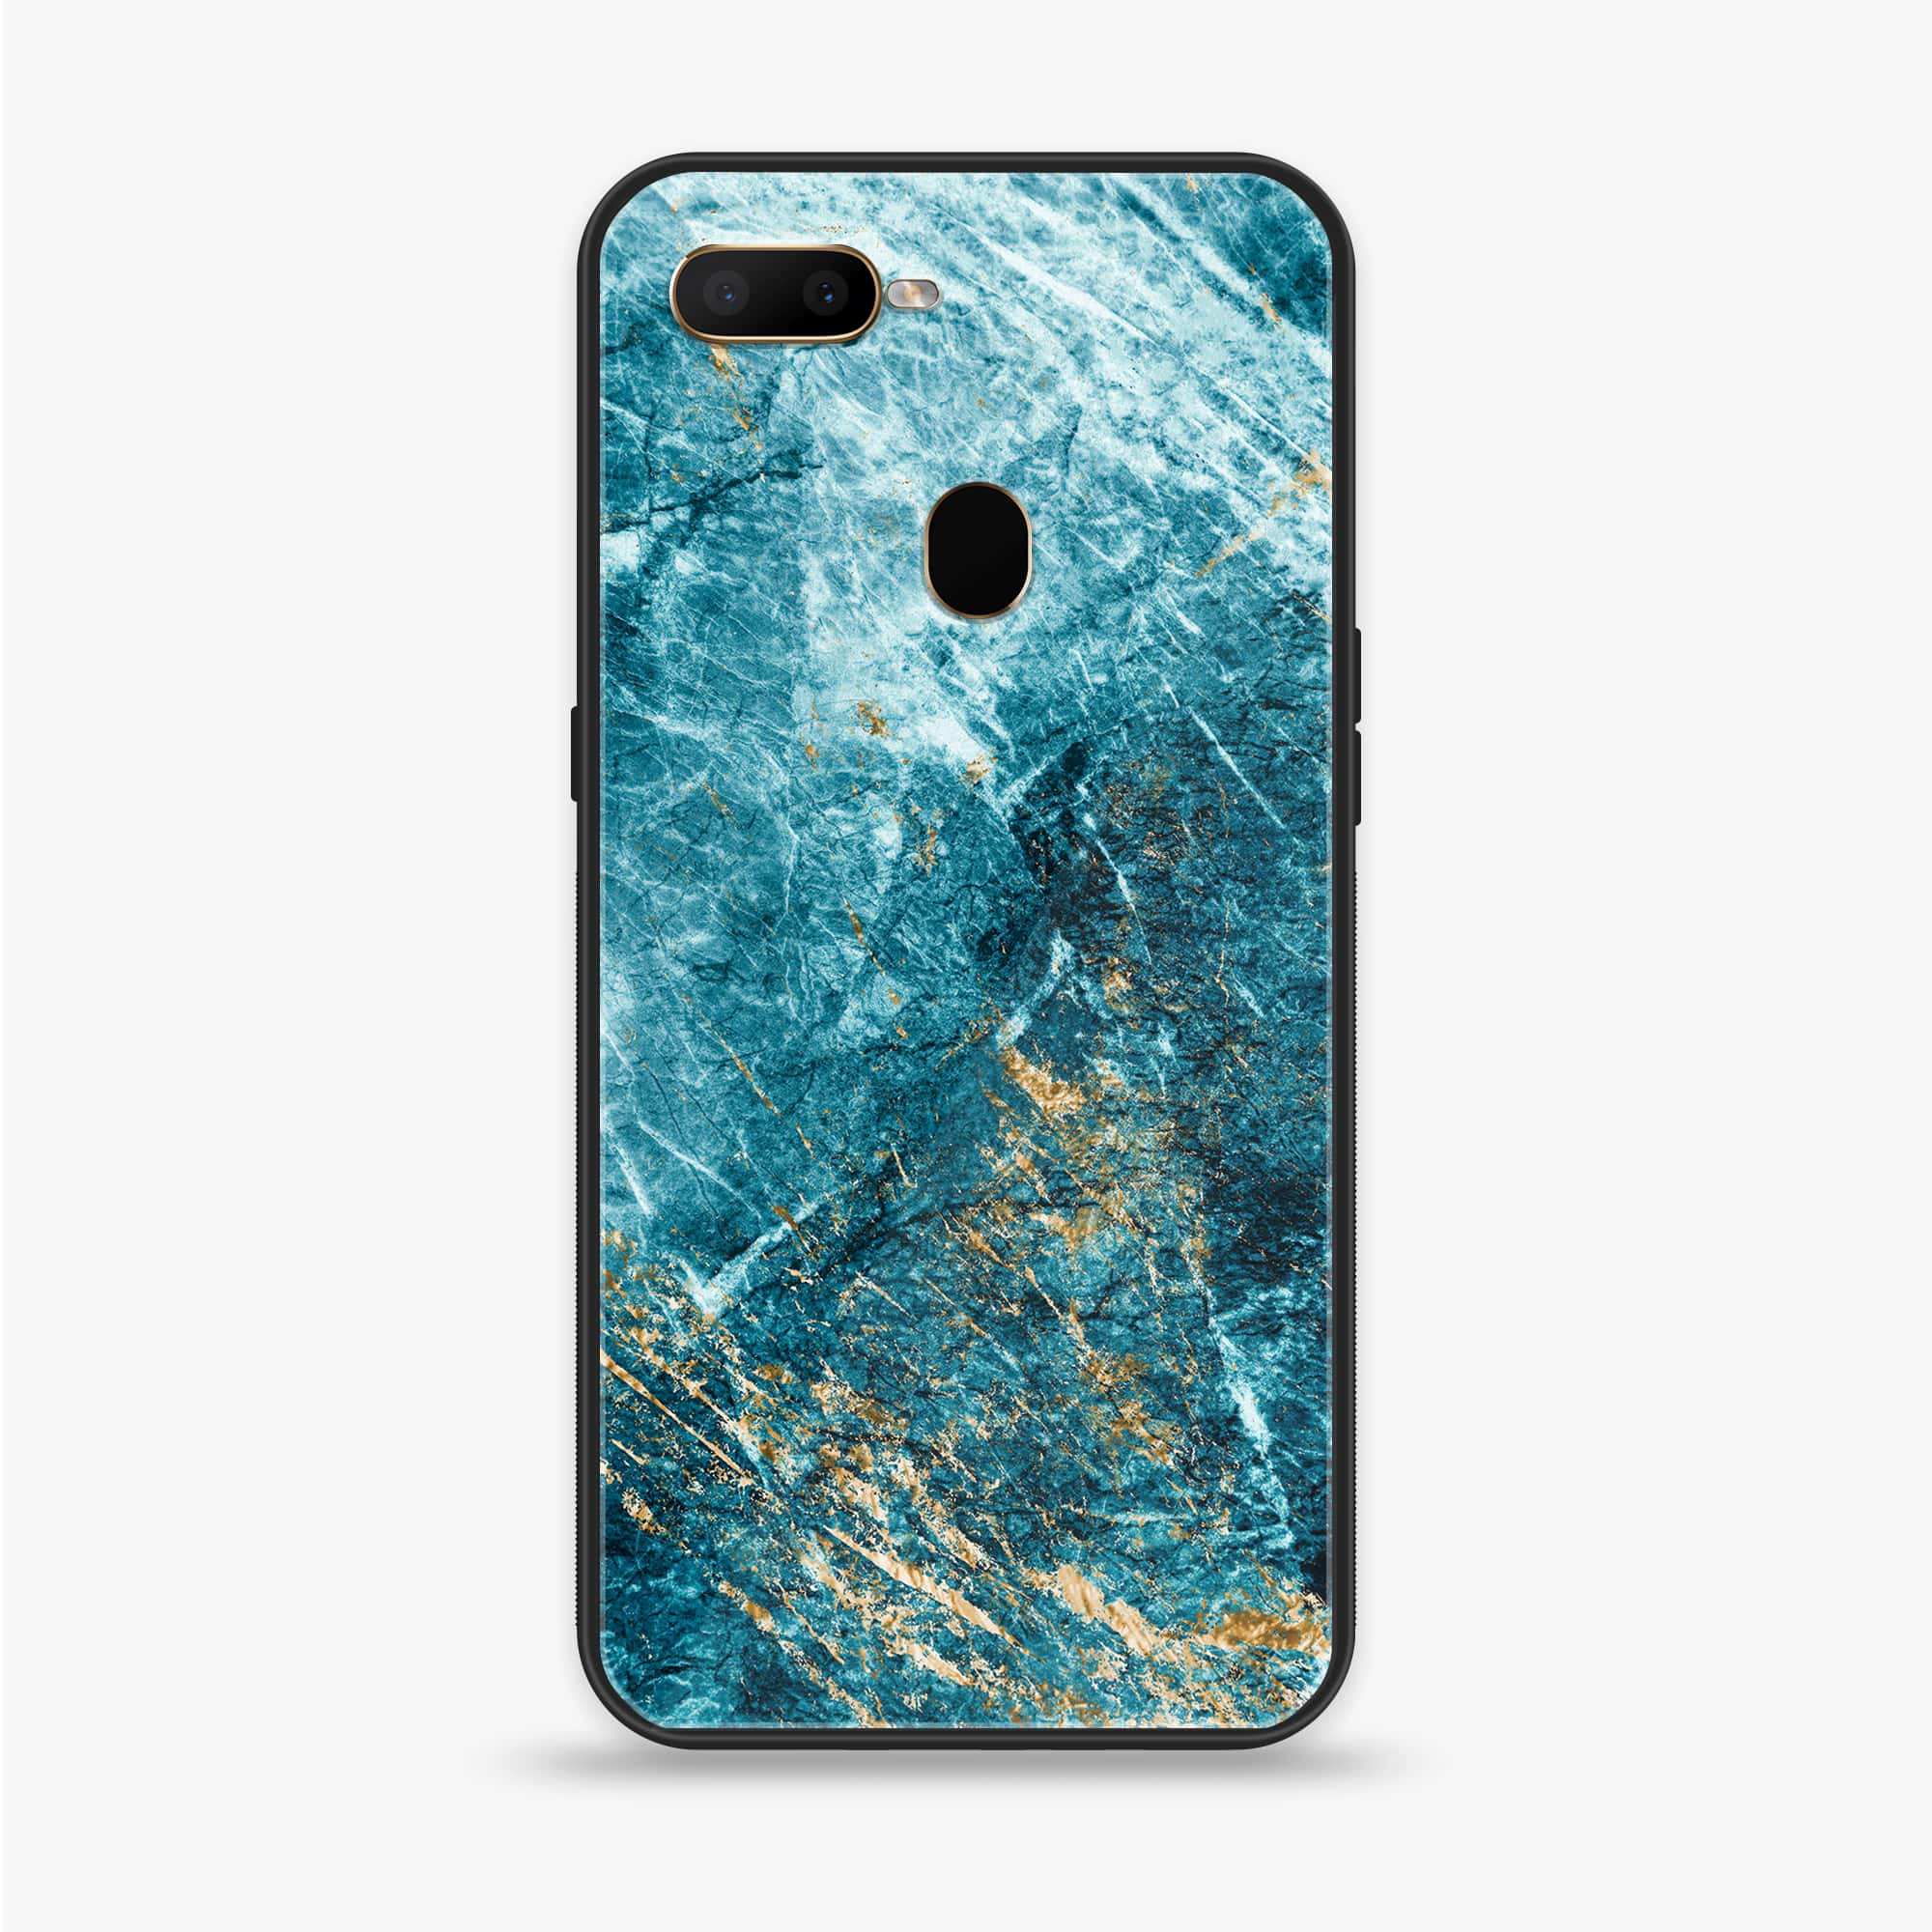 OPPO A5s - Blue Marble Series V 2.0 - Premium Printed Glass soft Bumper shock Proof Case